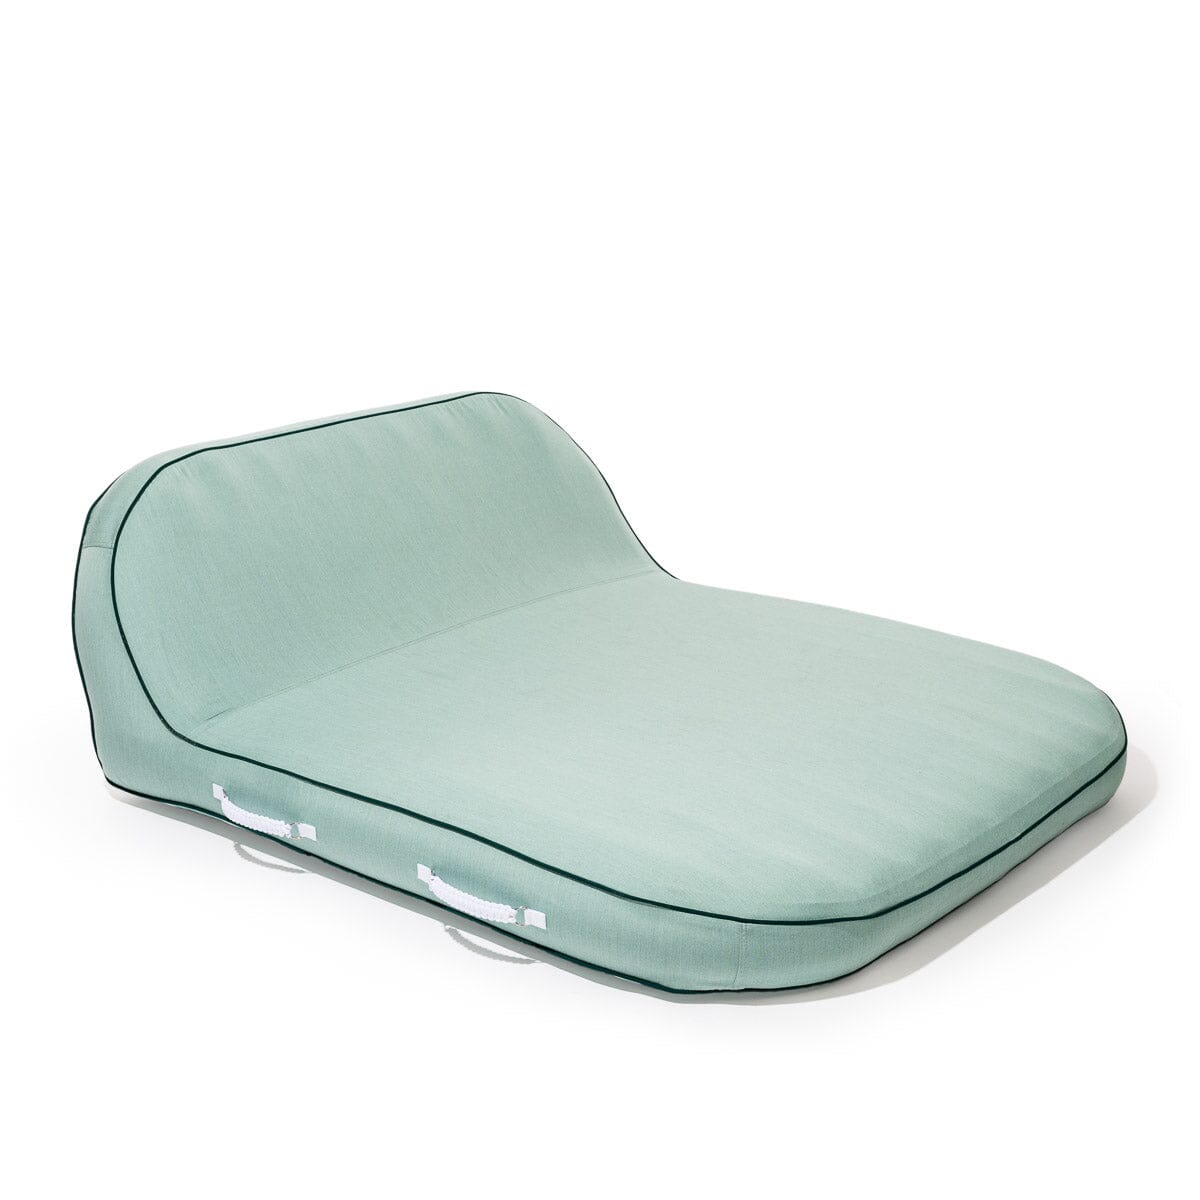 The XL Pool Lounger - Rivie Green Pool Lounger Business & Pleasure Co Aus 